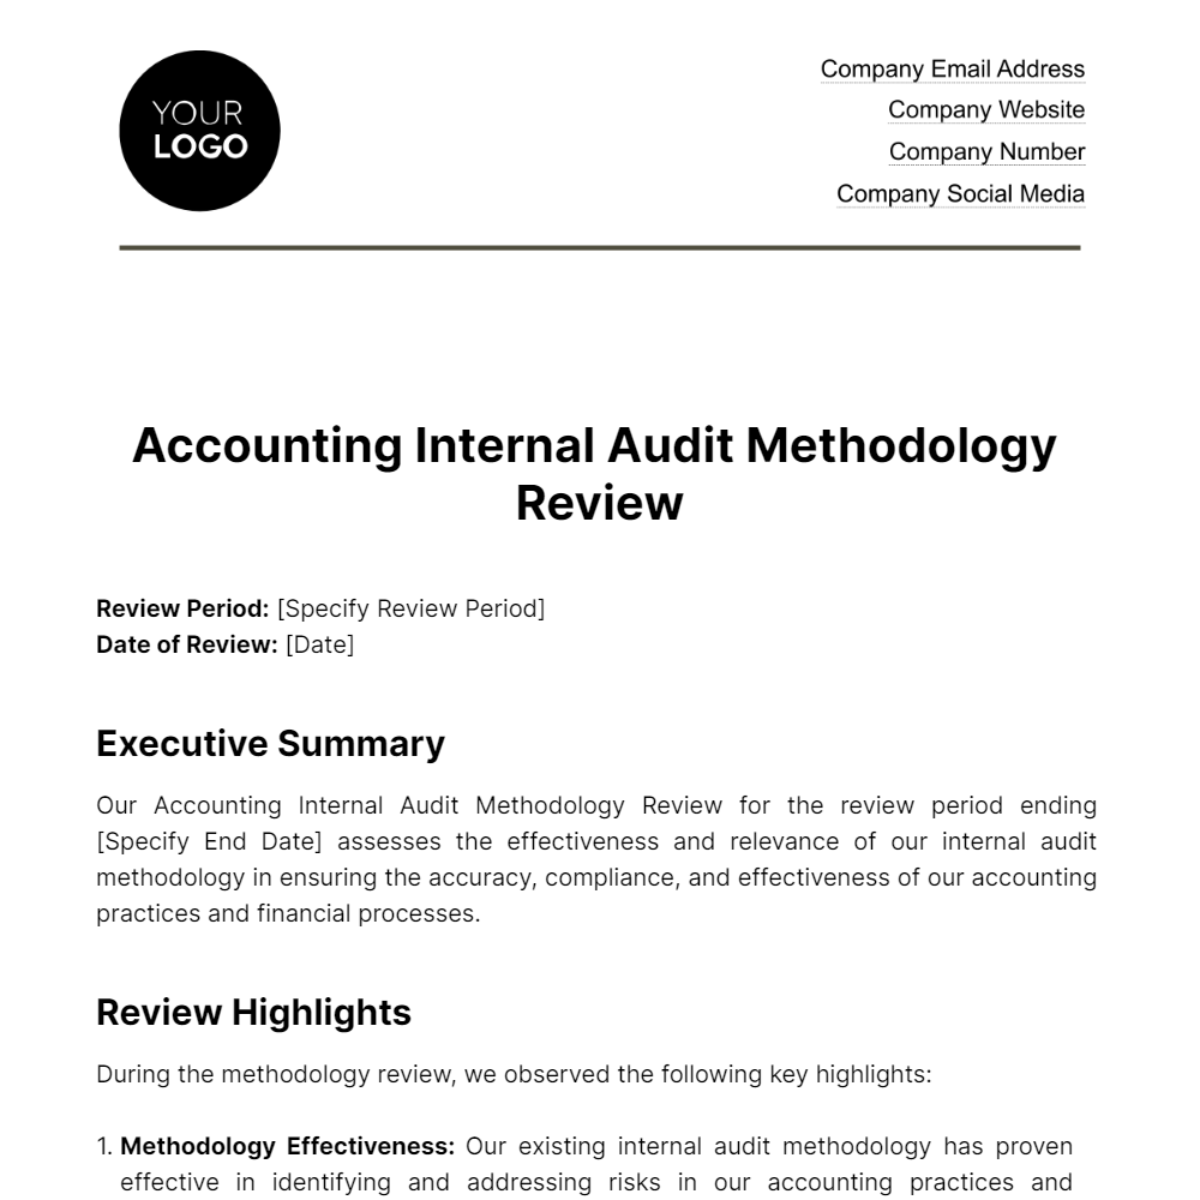 Accounting Internal Audit Methodology Review Template